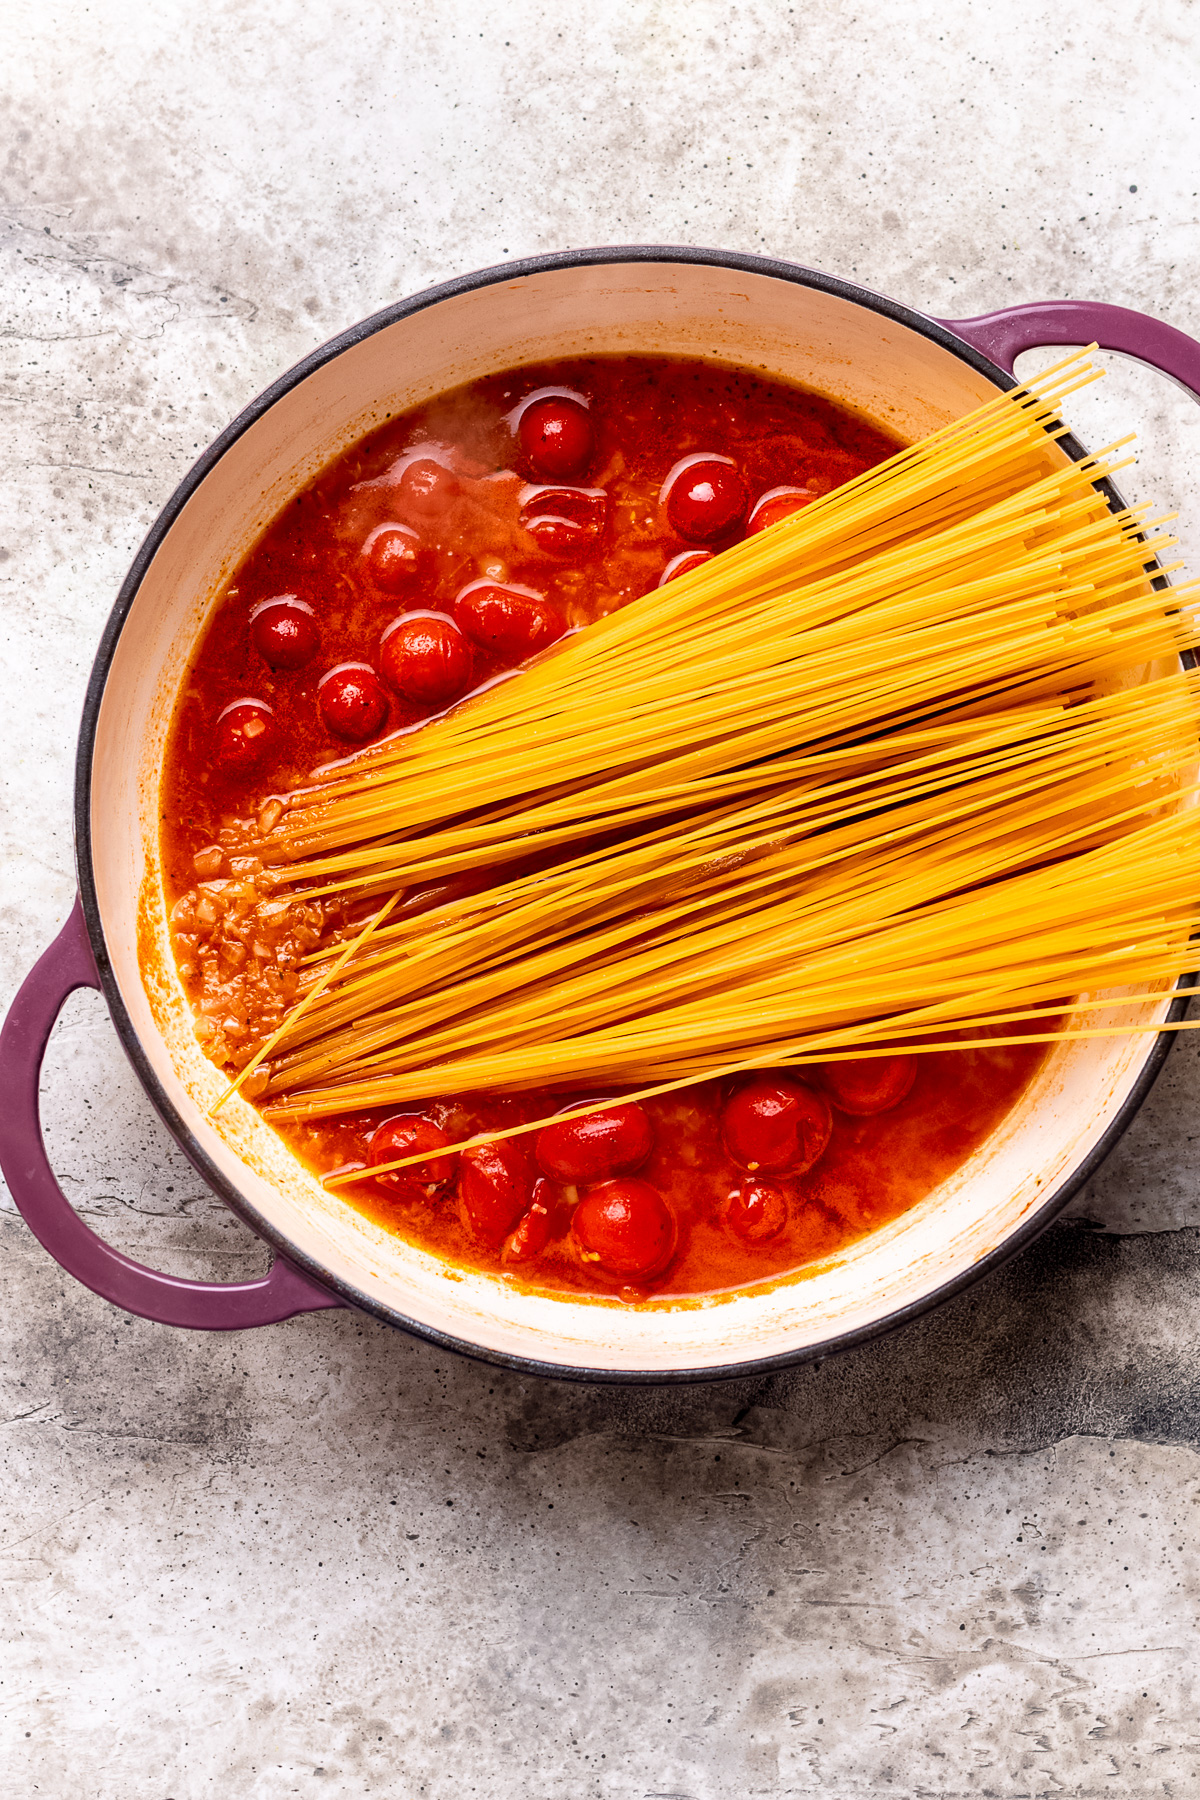 Pasta is added to tomato sauce to cook.